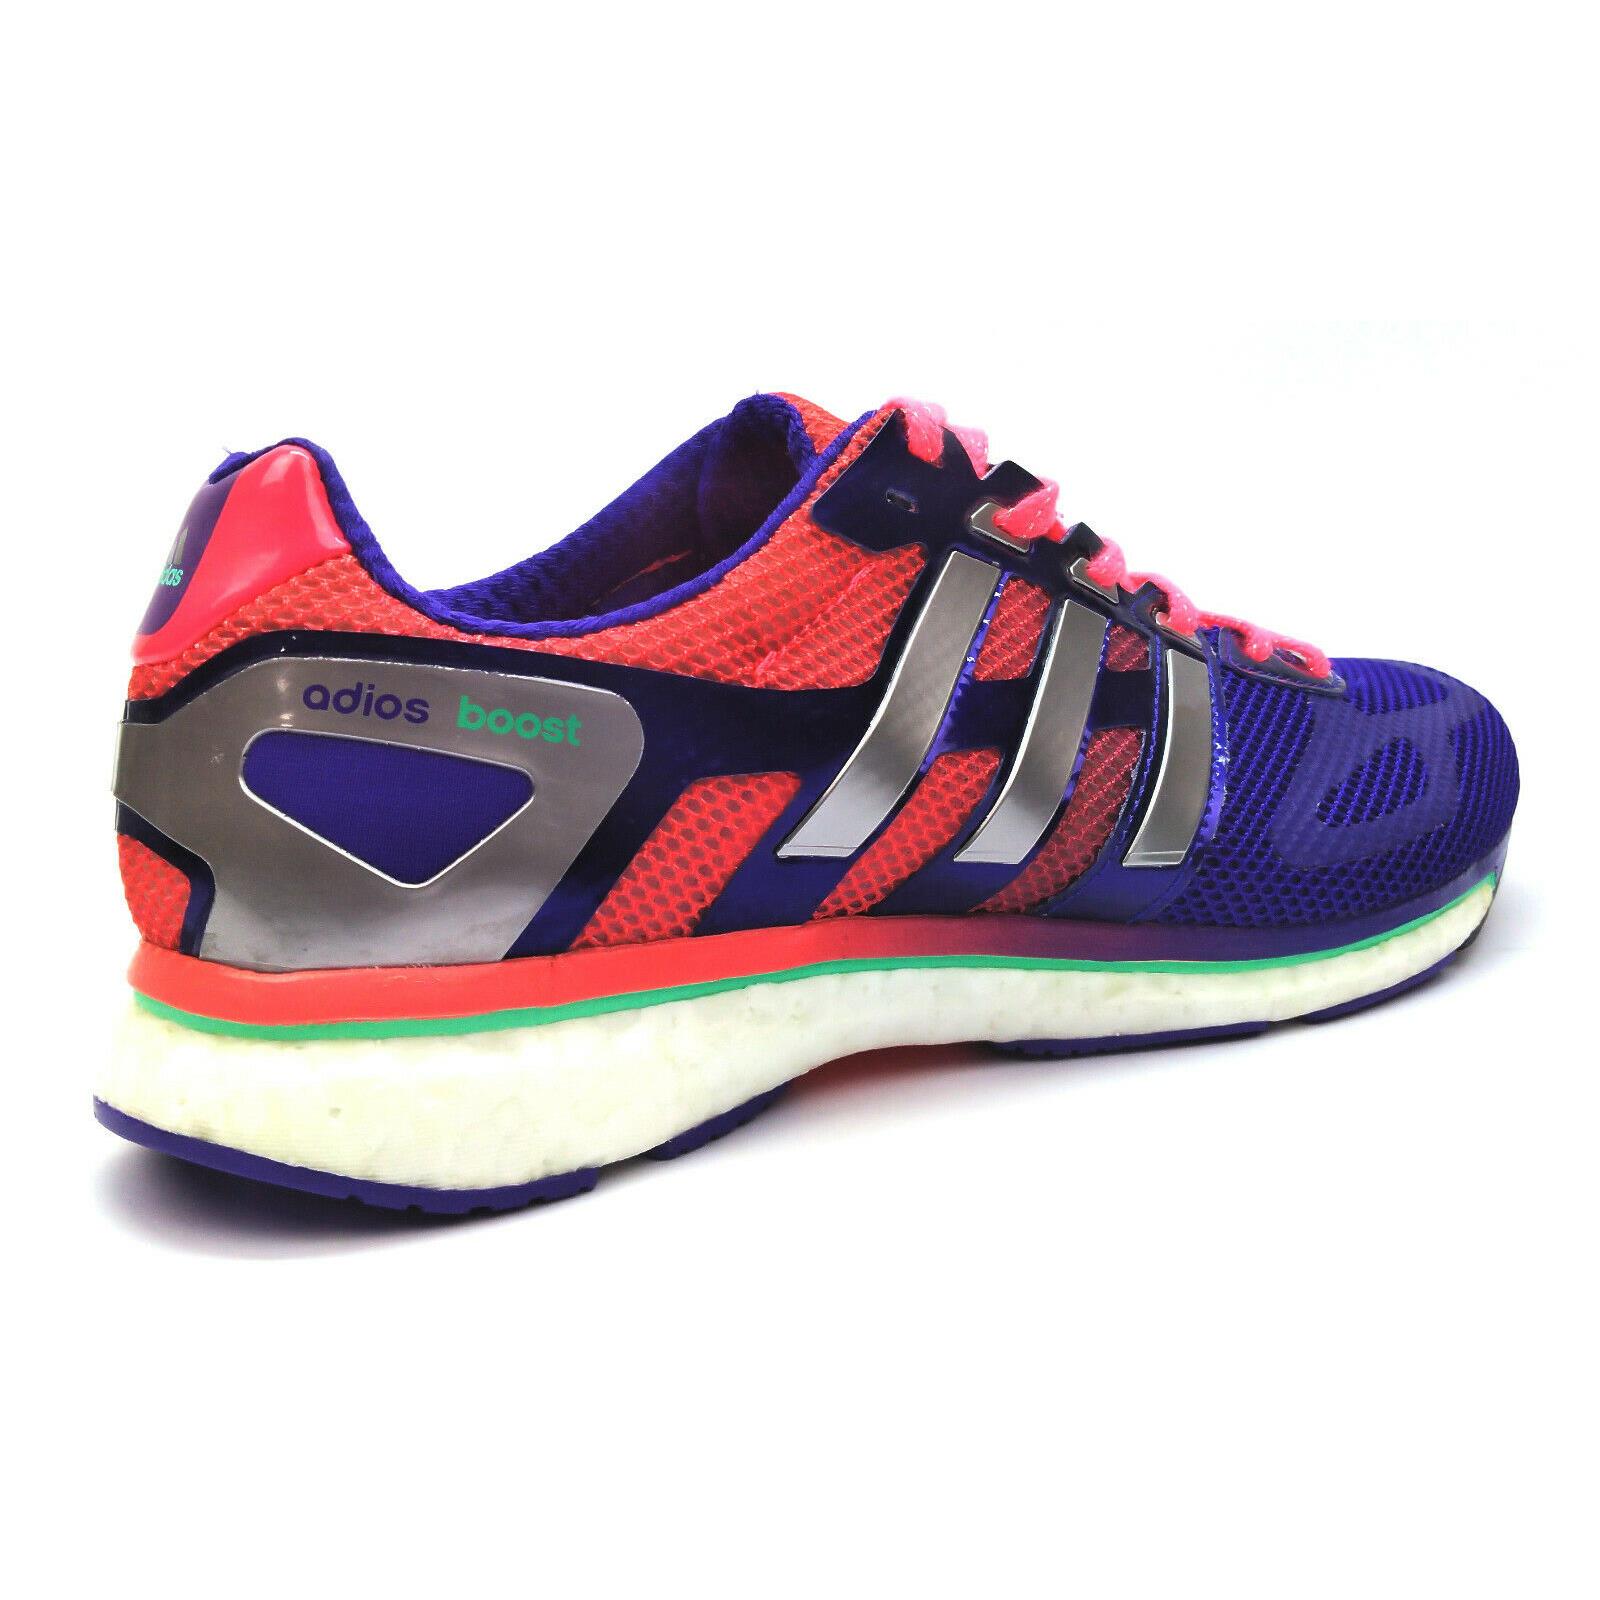 Adidas Adizero Adios Boost Women`s Lace Up Round Toe Running Shoes ليتون